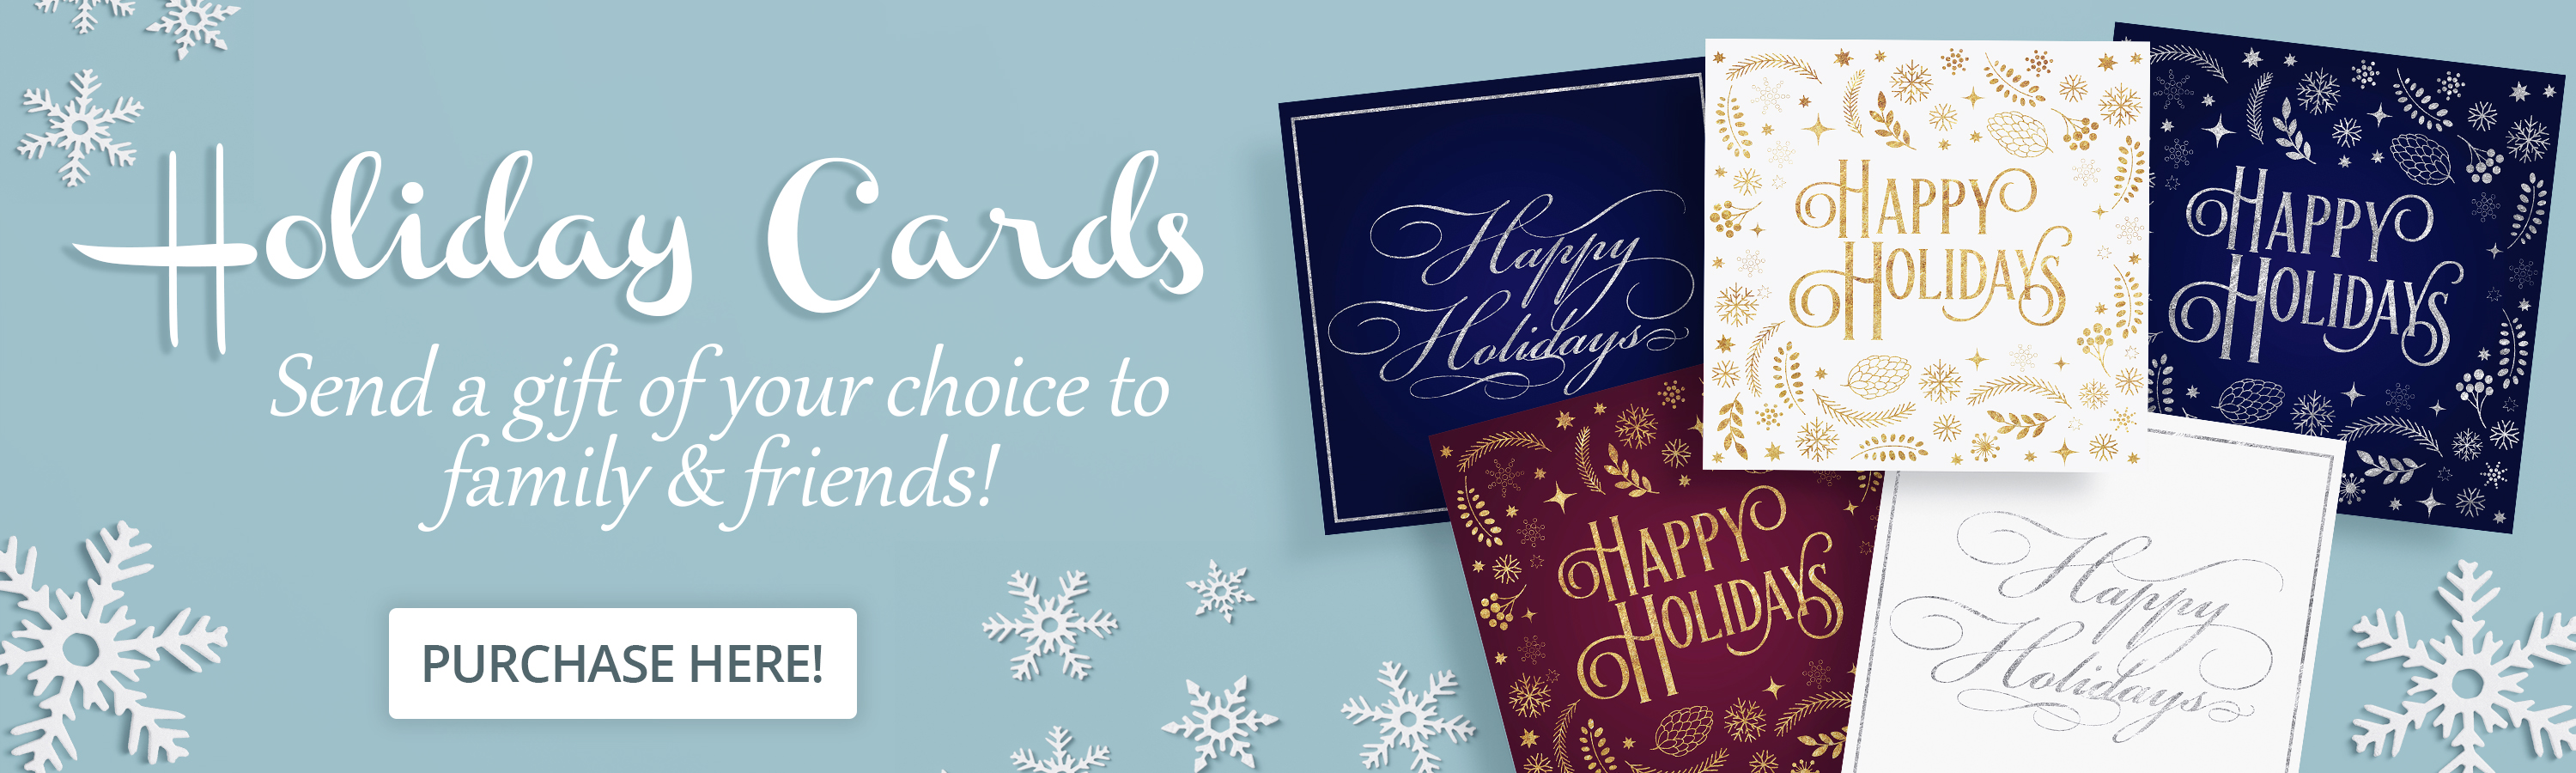 holiday cards 2015 banner 3